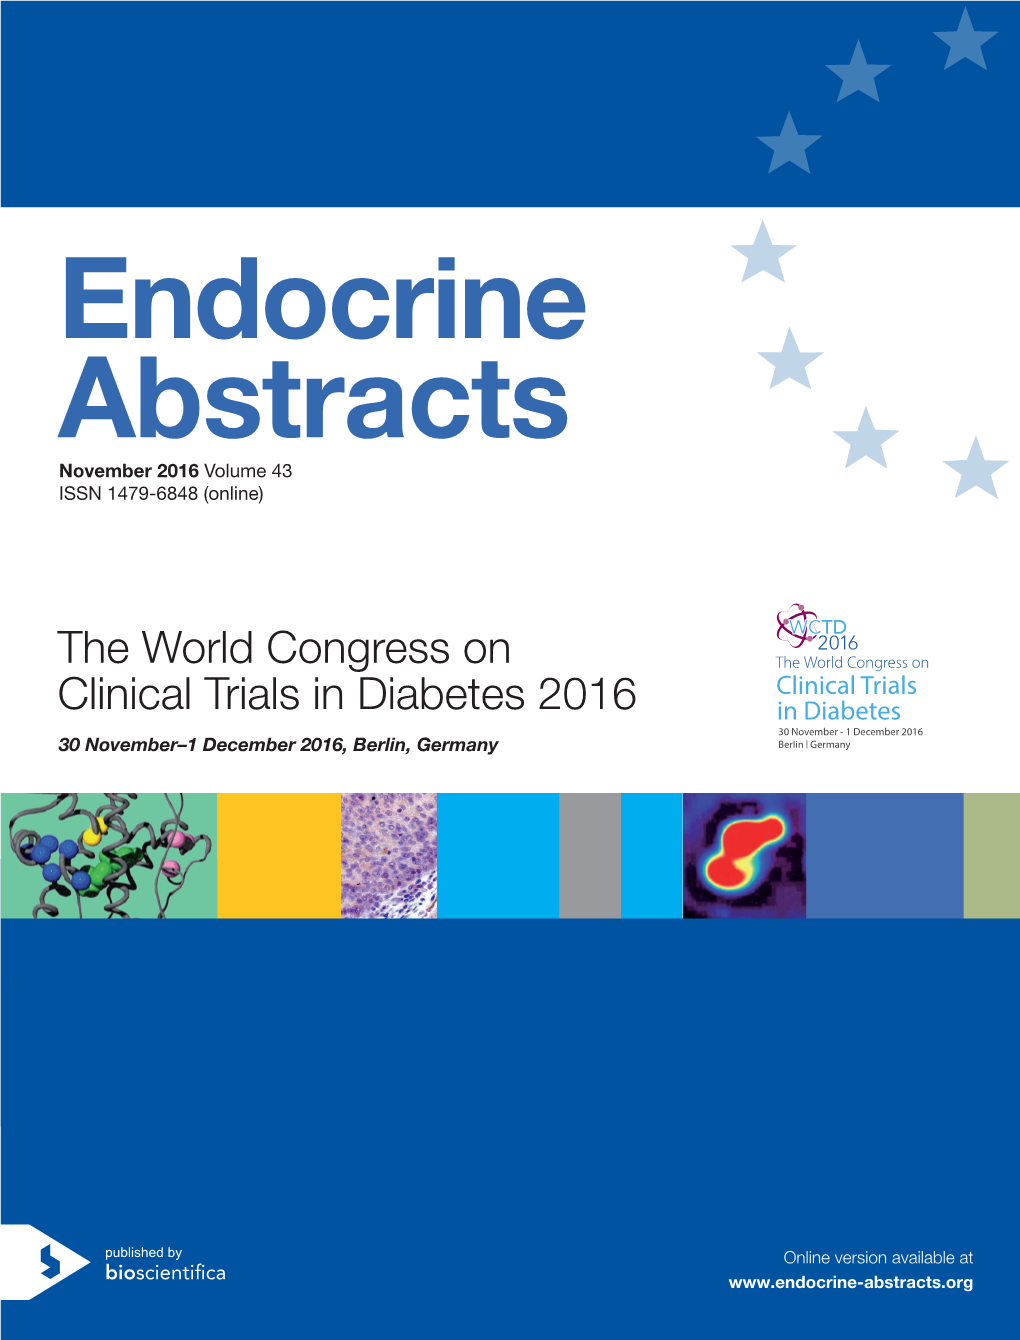 Endocrine Abstracts Vol 43